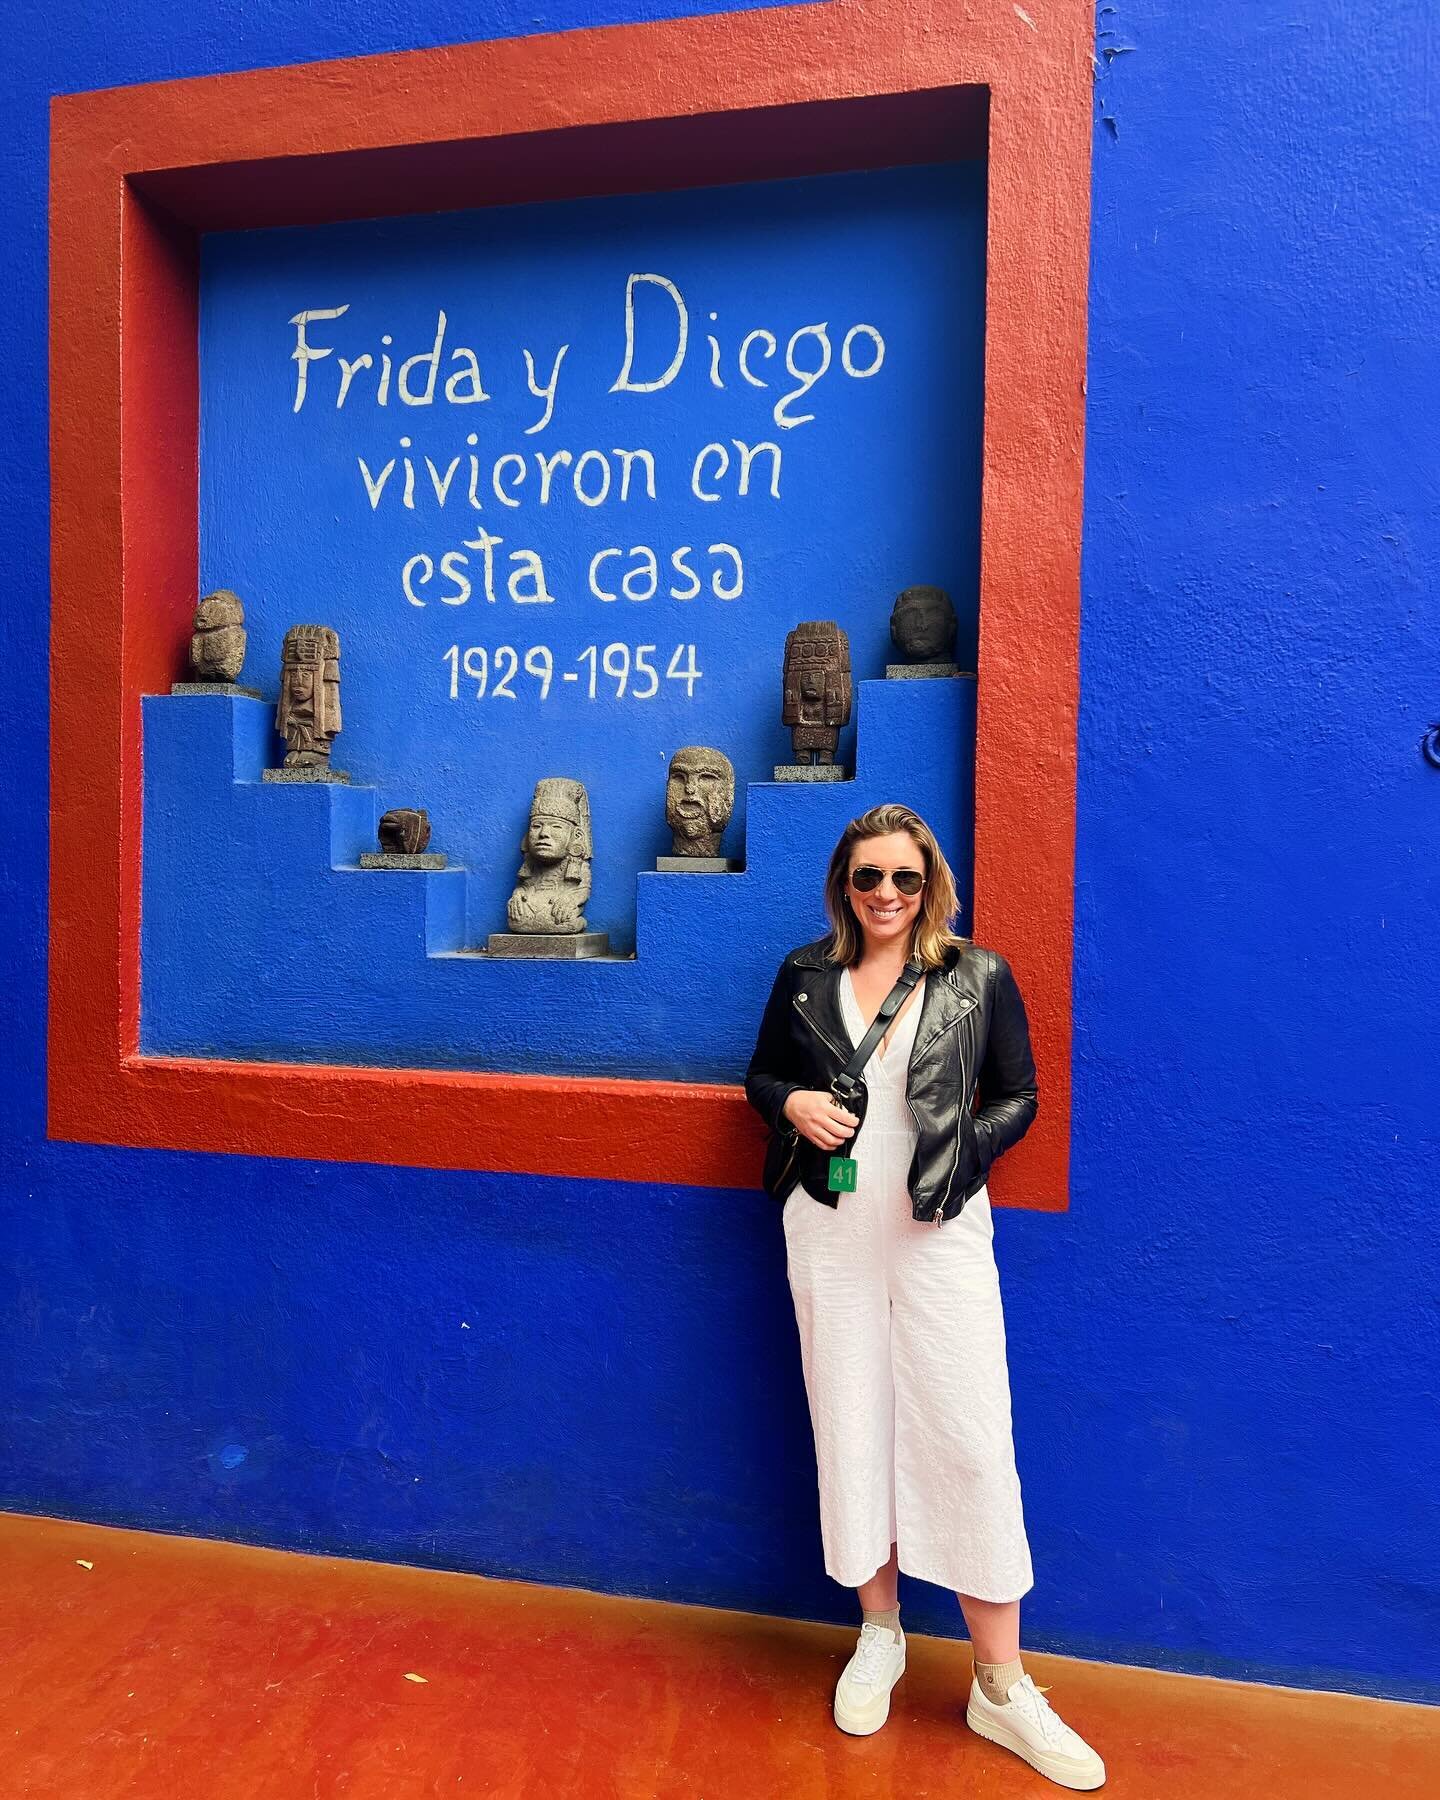 No museum has moved me to tears like the Frida Kahlo Museum in Mexico City. I&rsquo;ve always adored Frida and known her story&hellip;. But it wasn&rsquo;t until I saw her back brace covered in paint splotches and sketches, an x-ray of her spinal fus